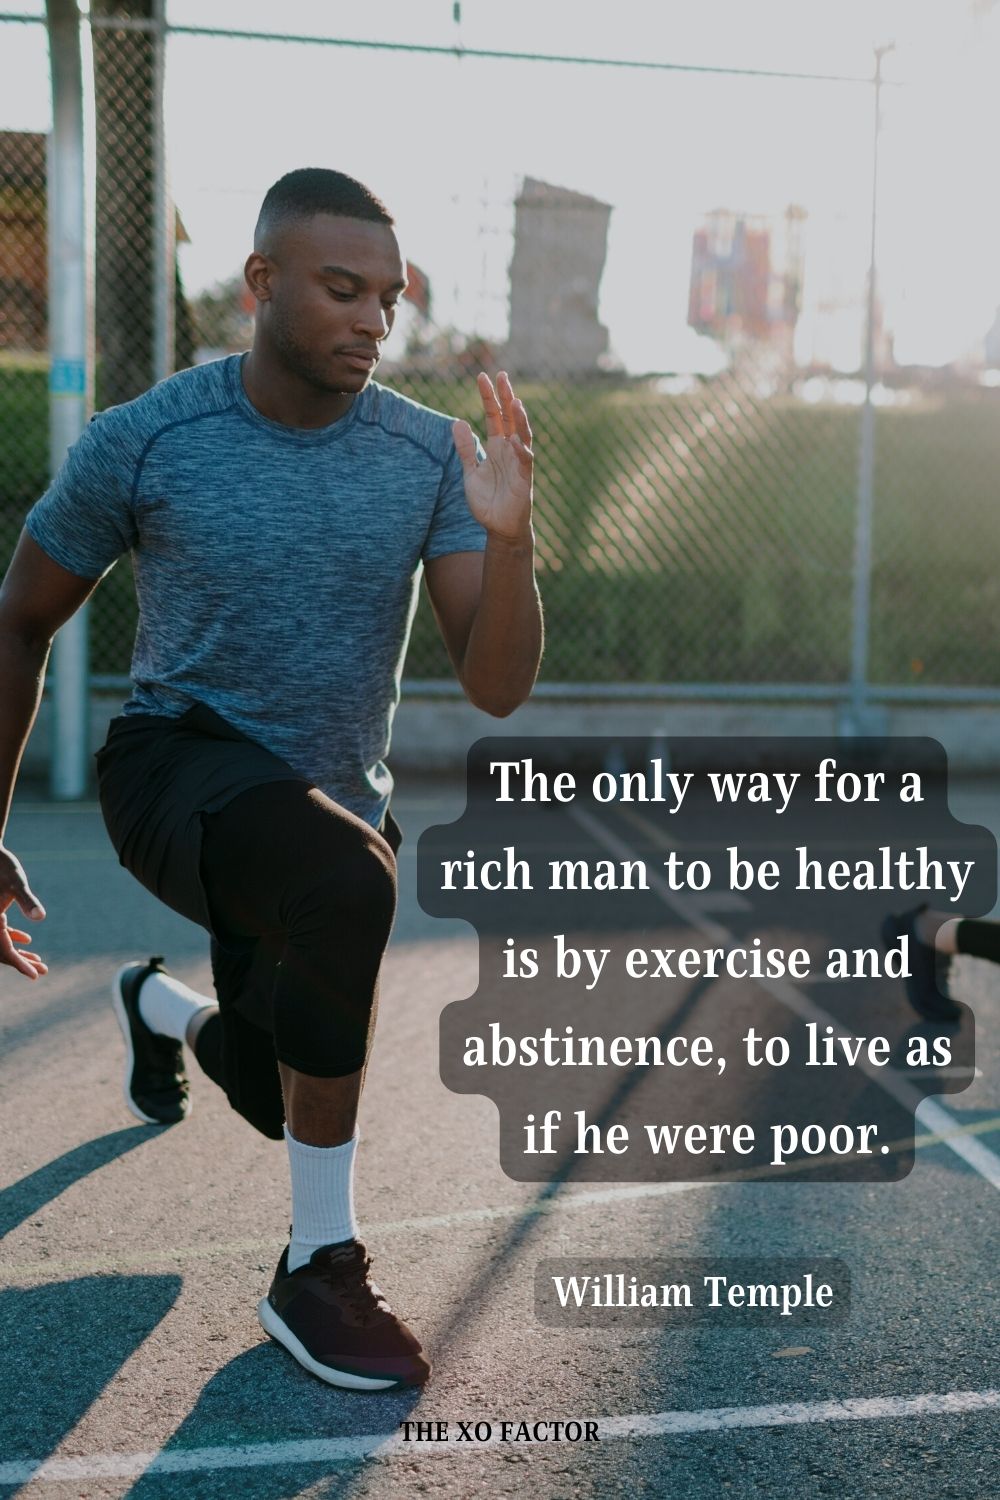 The only way for a rich man to be healthy is by exercise and abstinence, to live as if he were poor. William Temple